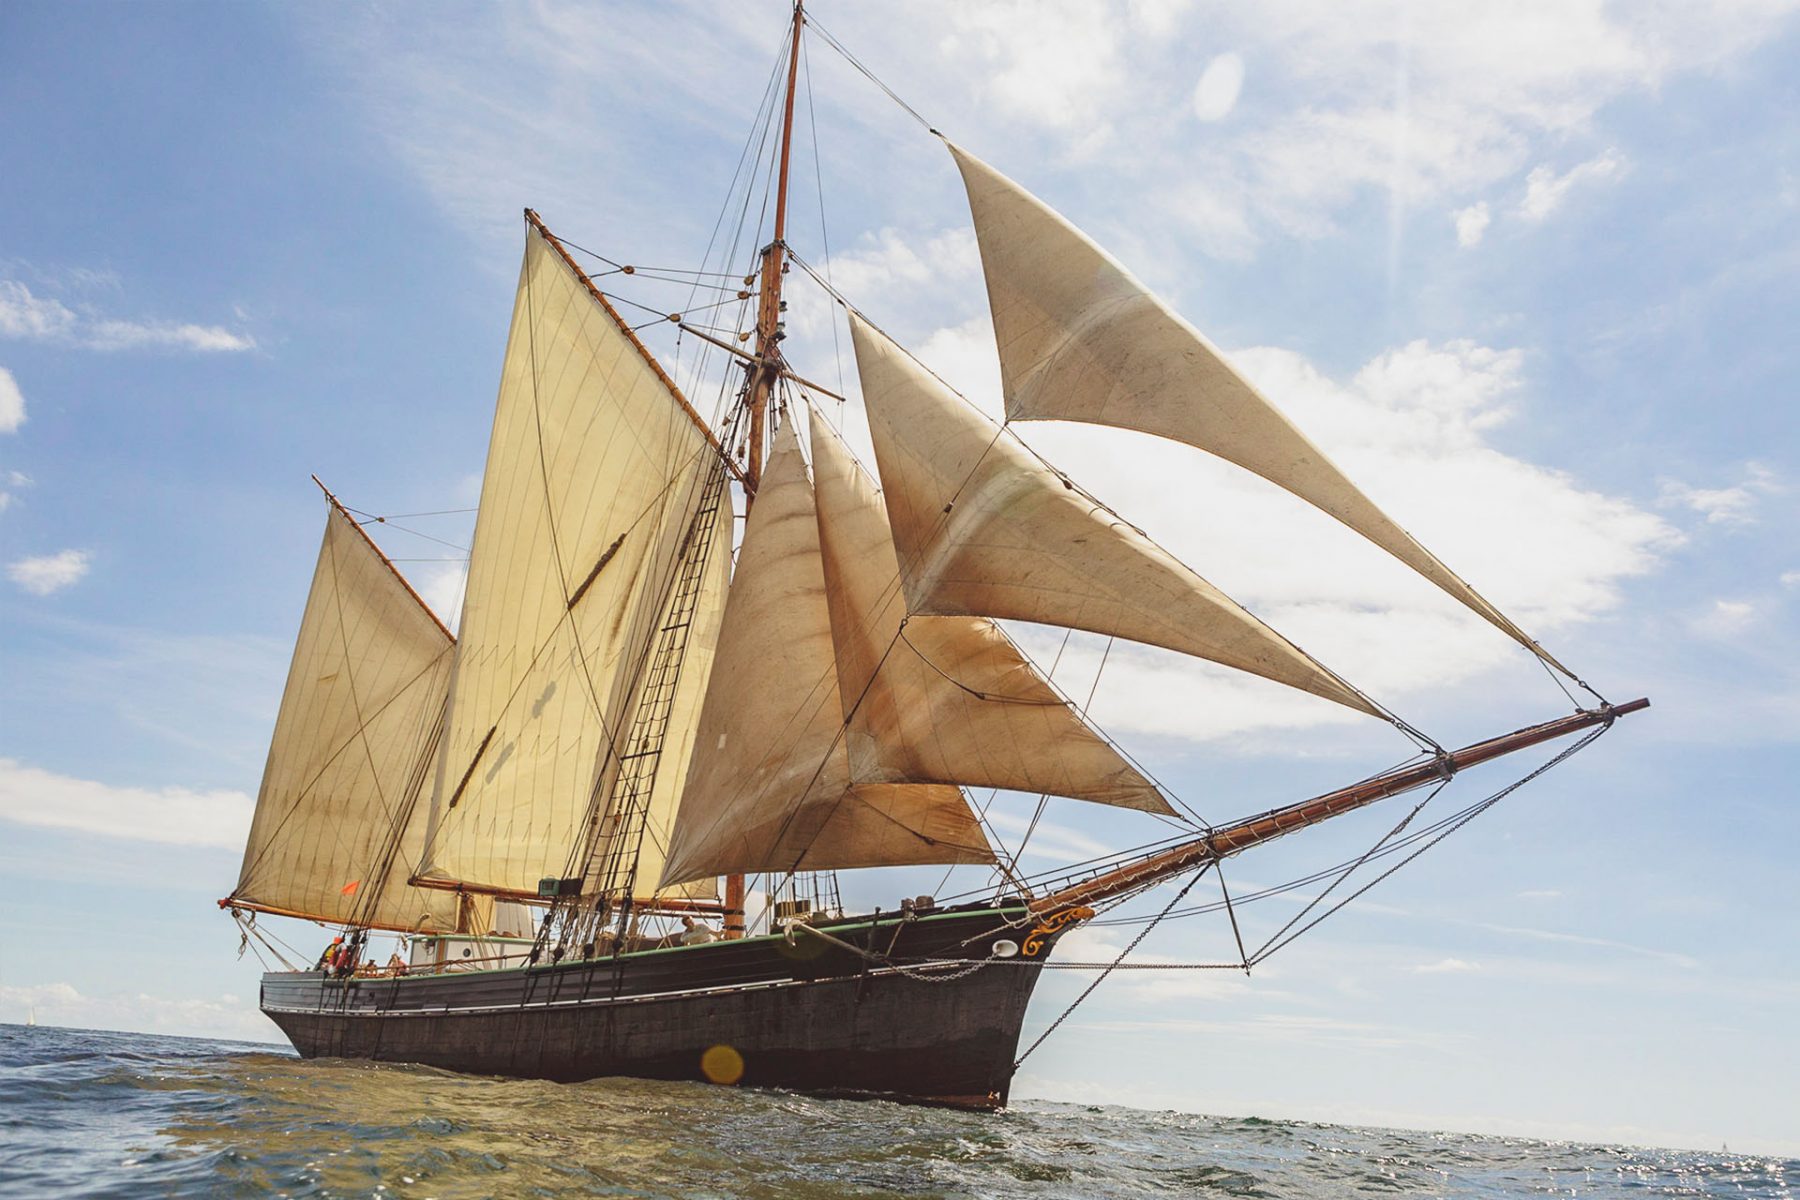 Sailing Holidays aboard classic ship Bessie with VentureSail Holidays